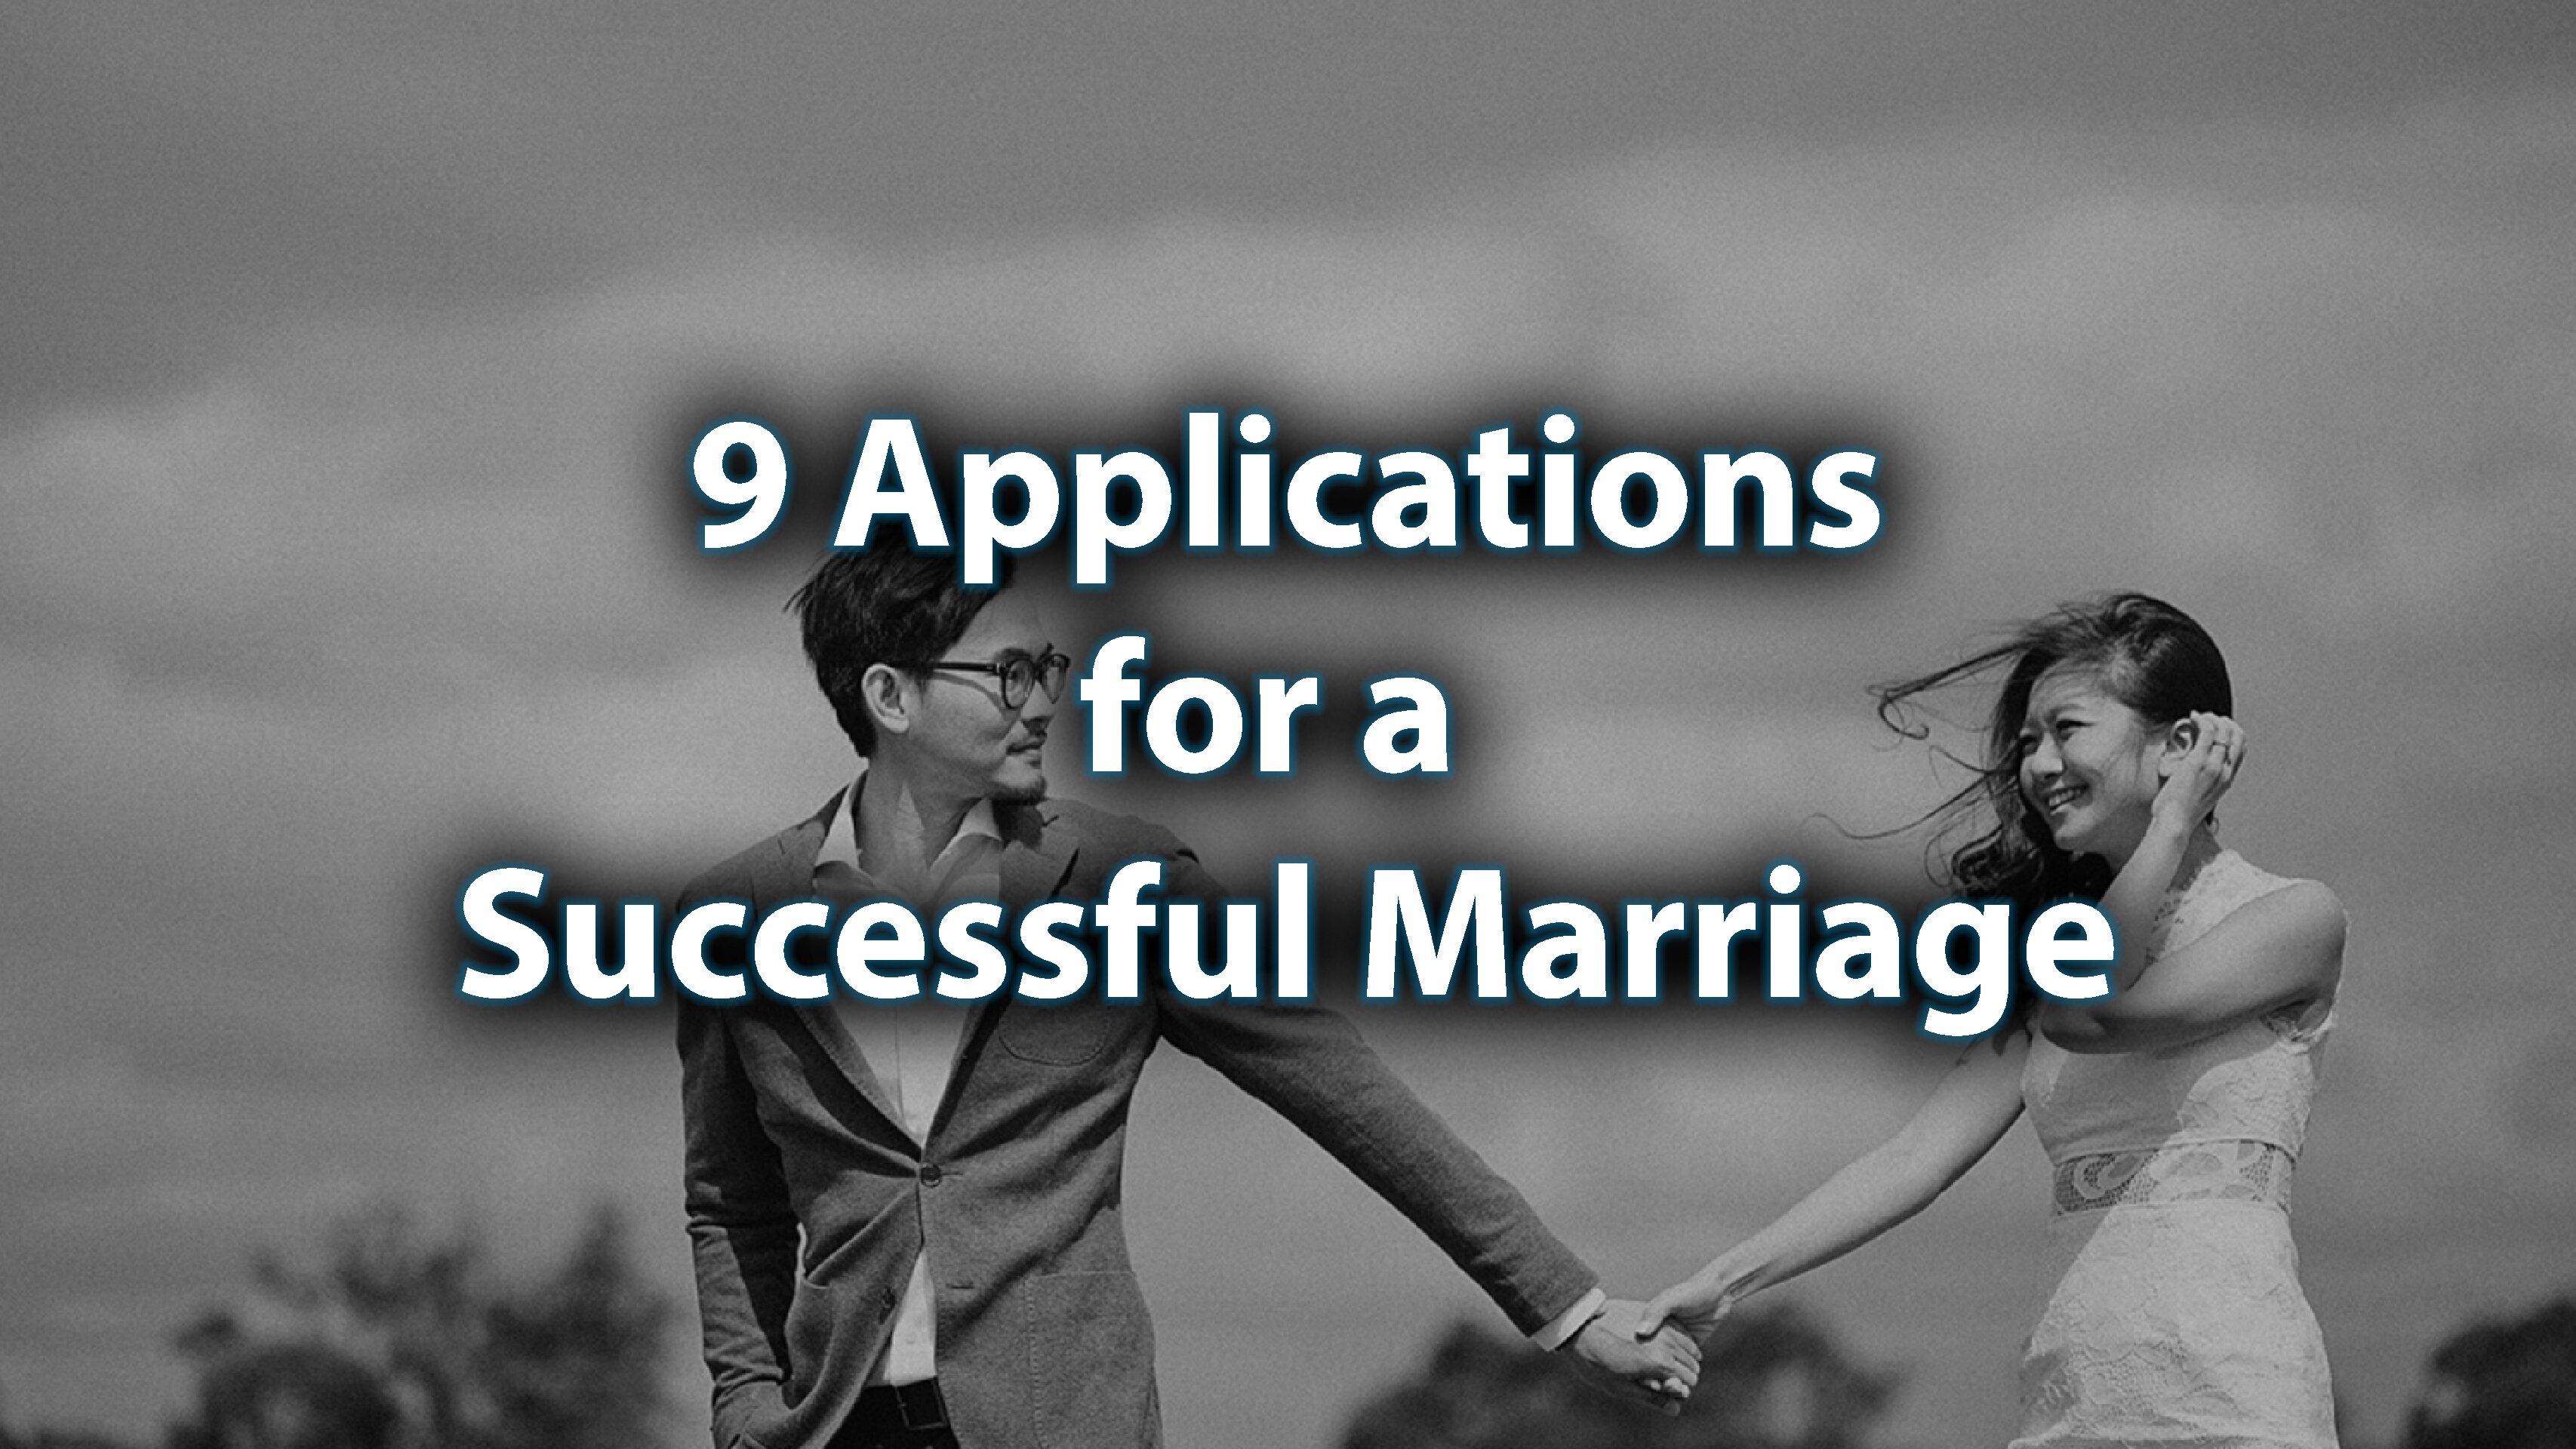 Day 28: 9 Applications for a Successful Marriage